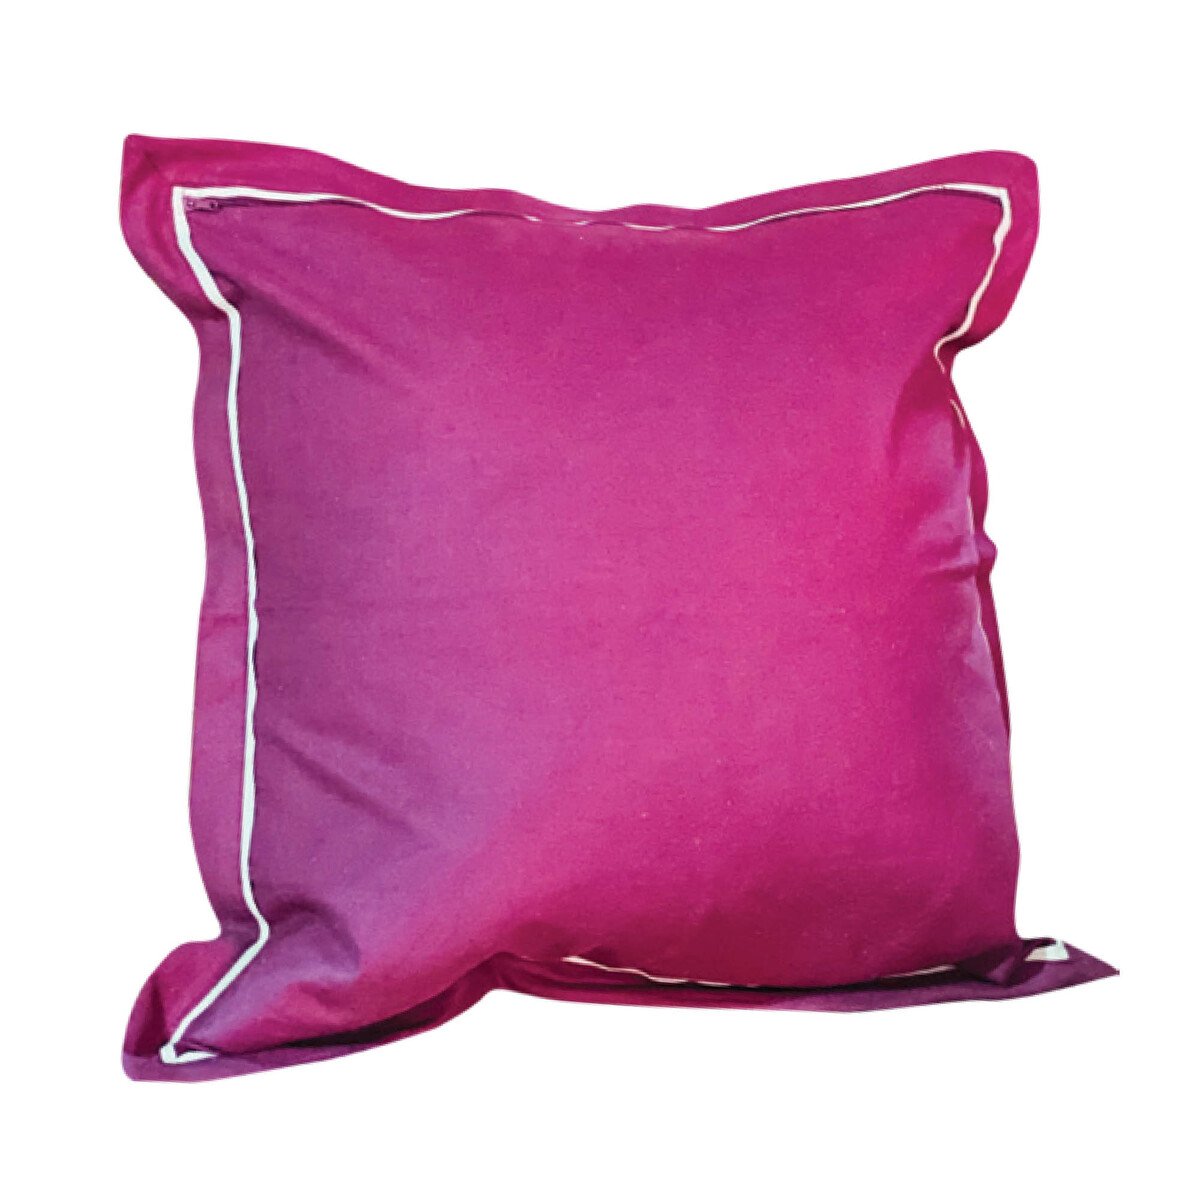 Shop Cushion Filler 45X45Cm - at Best Price Online in India